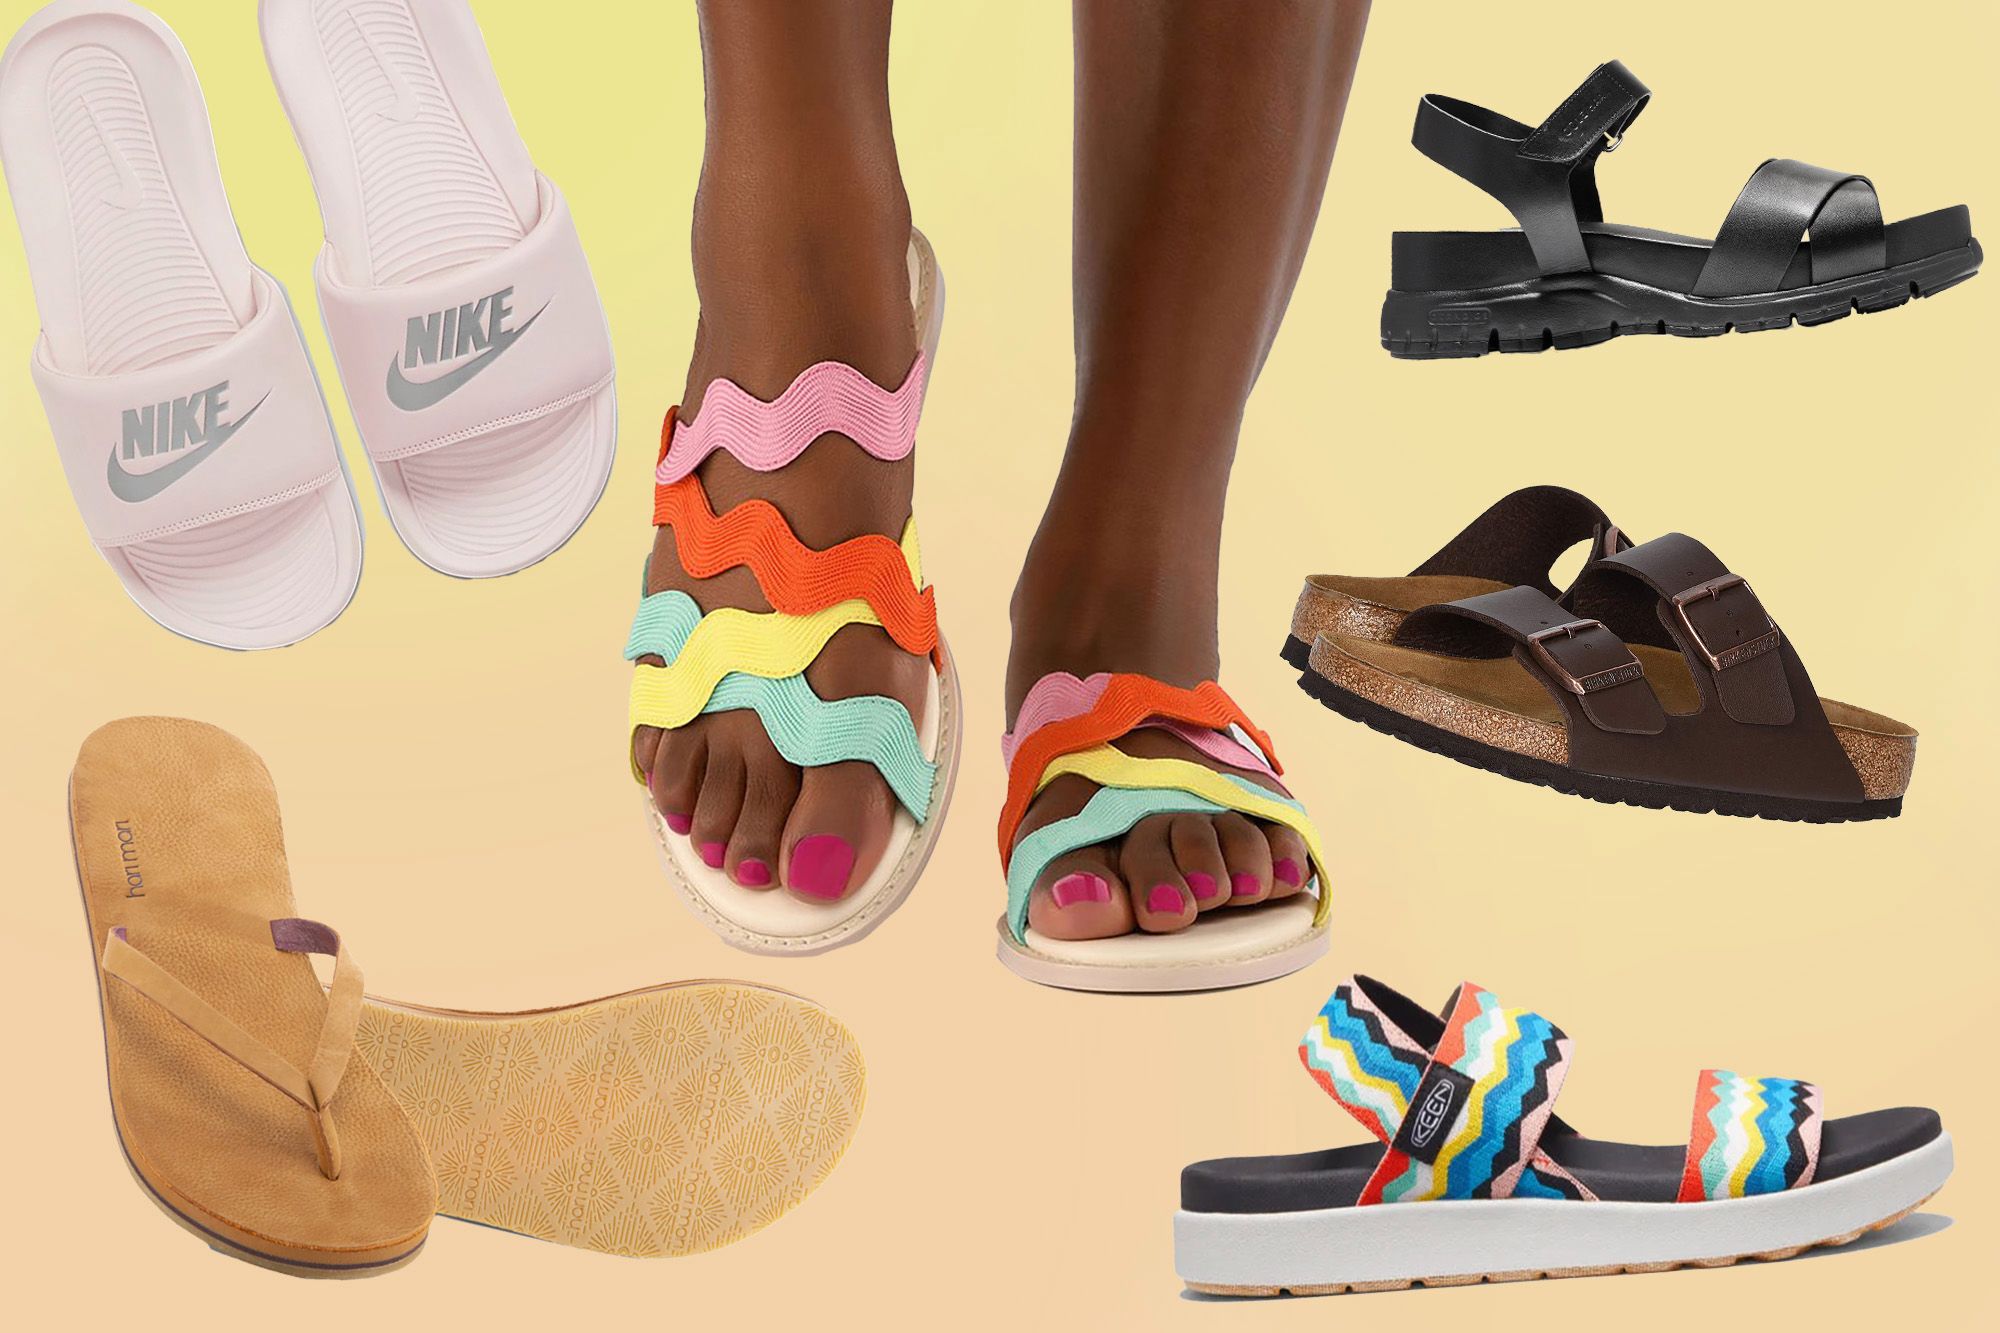  Super Comfortable Sandals You Need This Summer